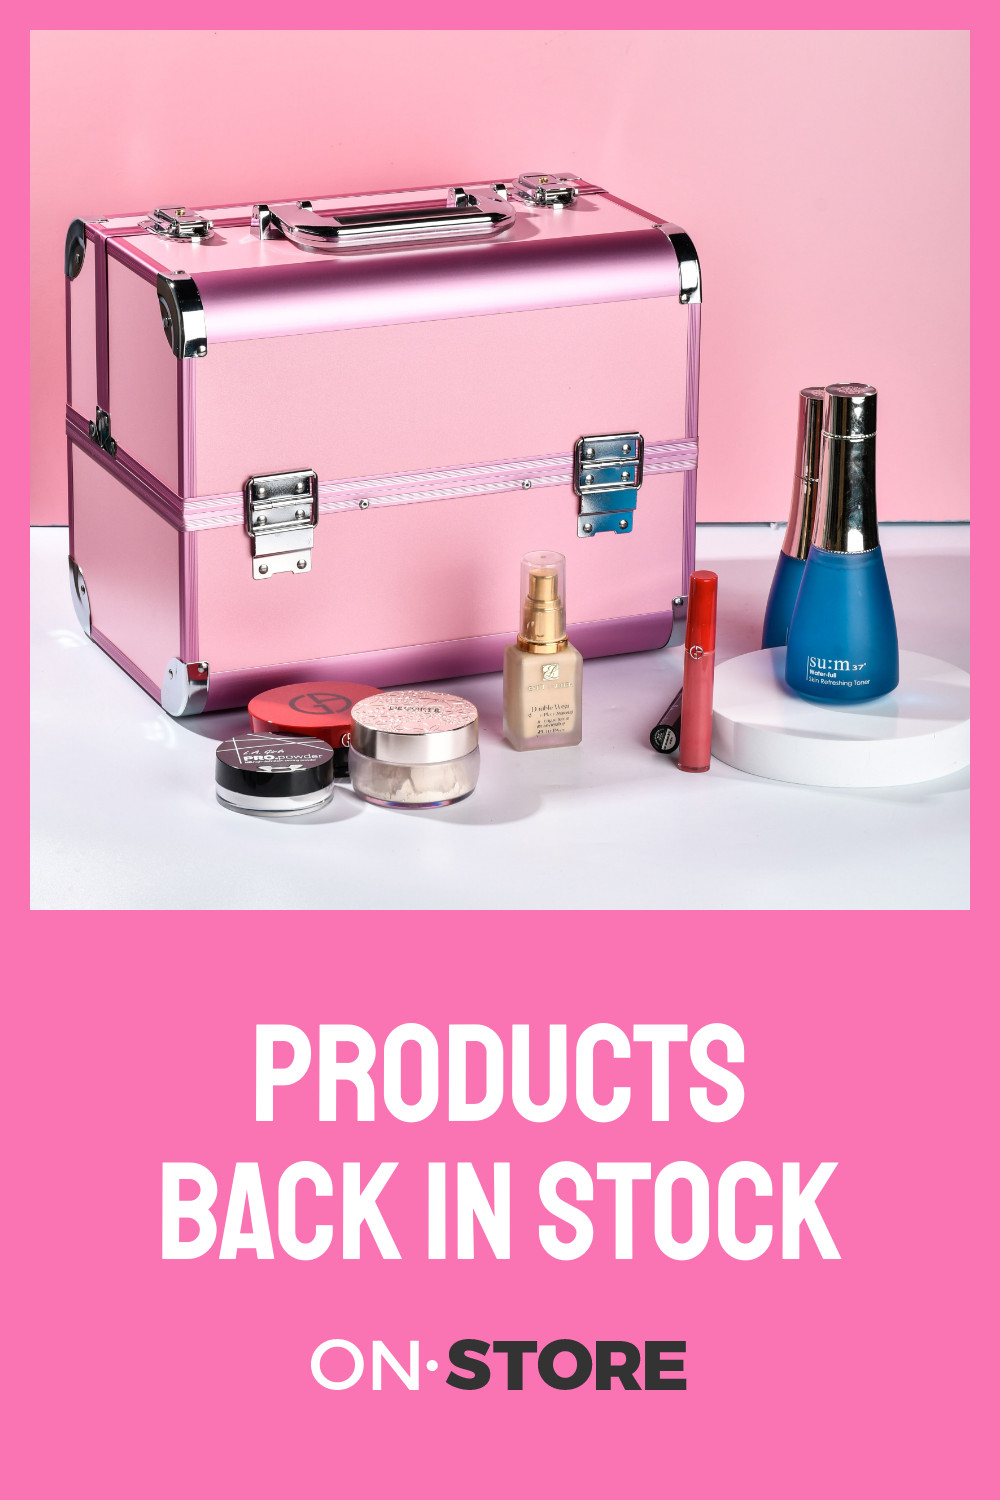 Beauty Products Back in Stock